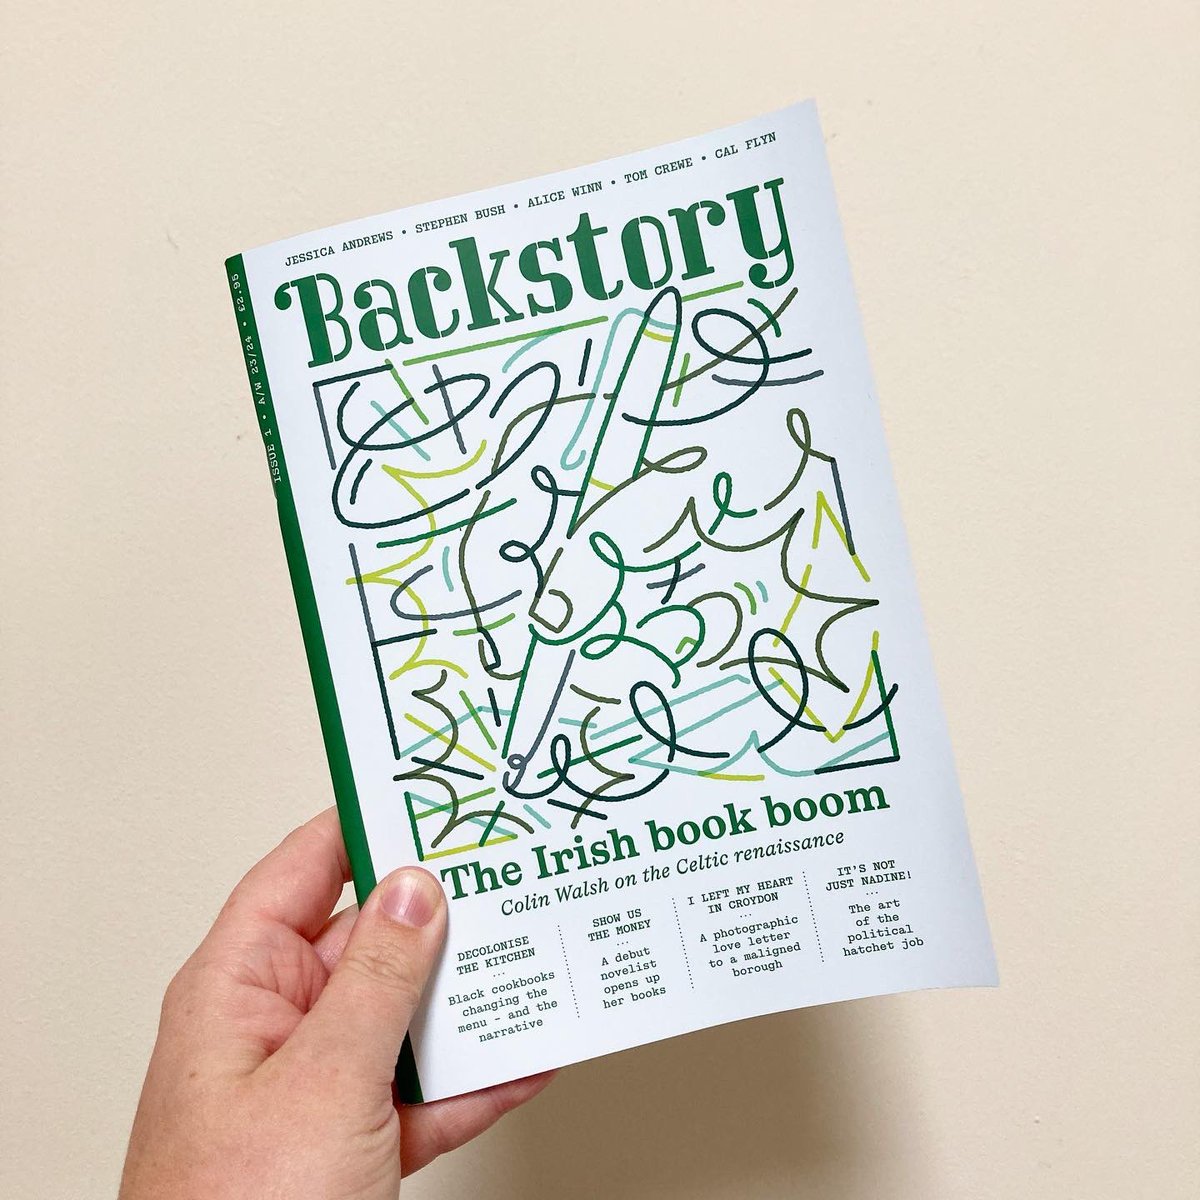 What does a book pay? 💰

Very pleased to have a feature in the very first issue of @BackstoryLdn Mag! Transparency is important in every industry - but especially for writers, who are usually freelance & spend so much time working in isolation. #BookJobTransparency